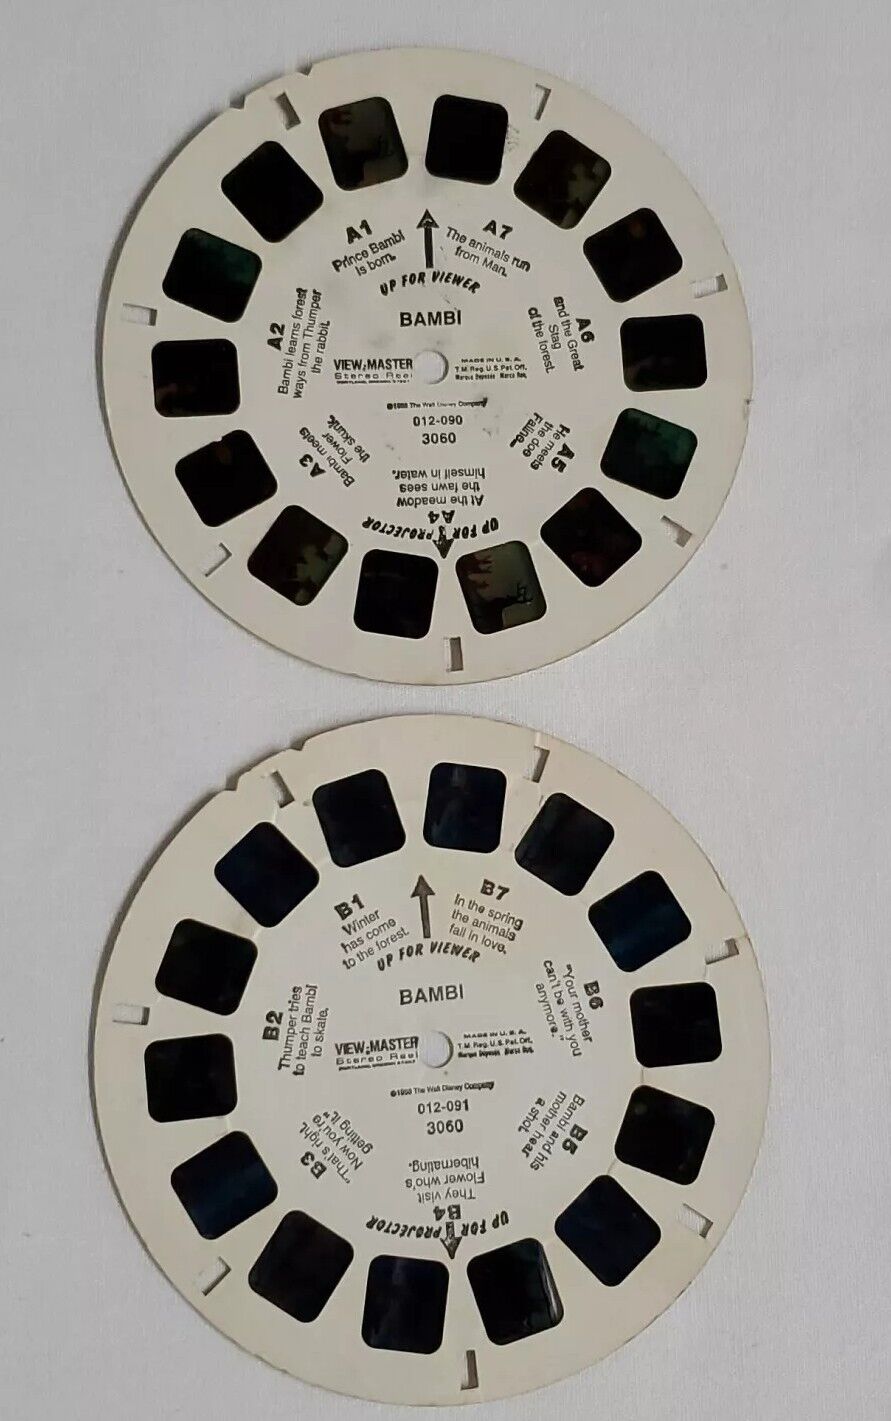 VTG 1988 View Master Reels A&B Bambi The Walt Disney Company Made In U.S.A 